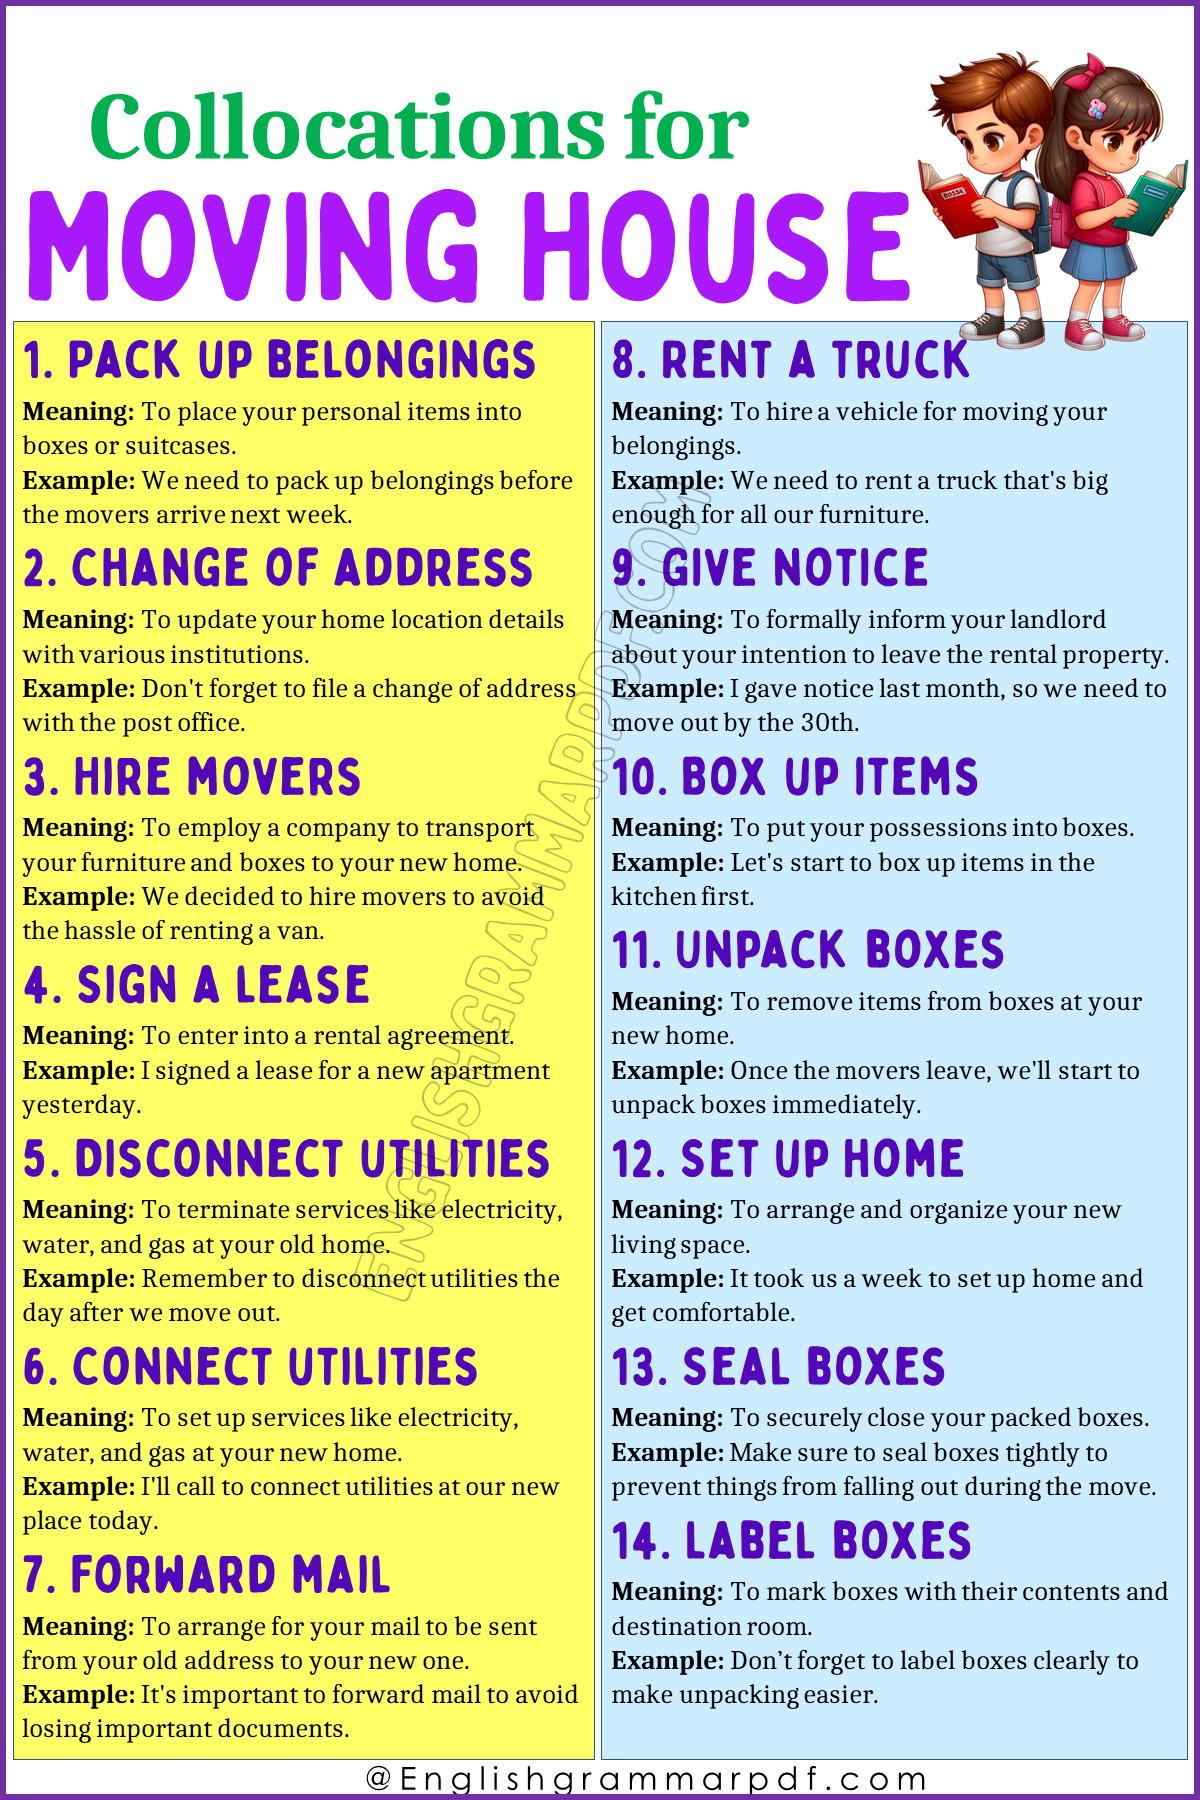 Collocations for Moving House